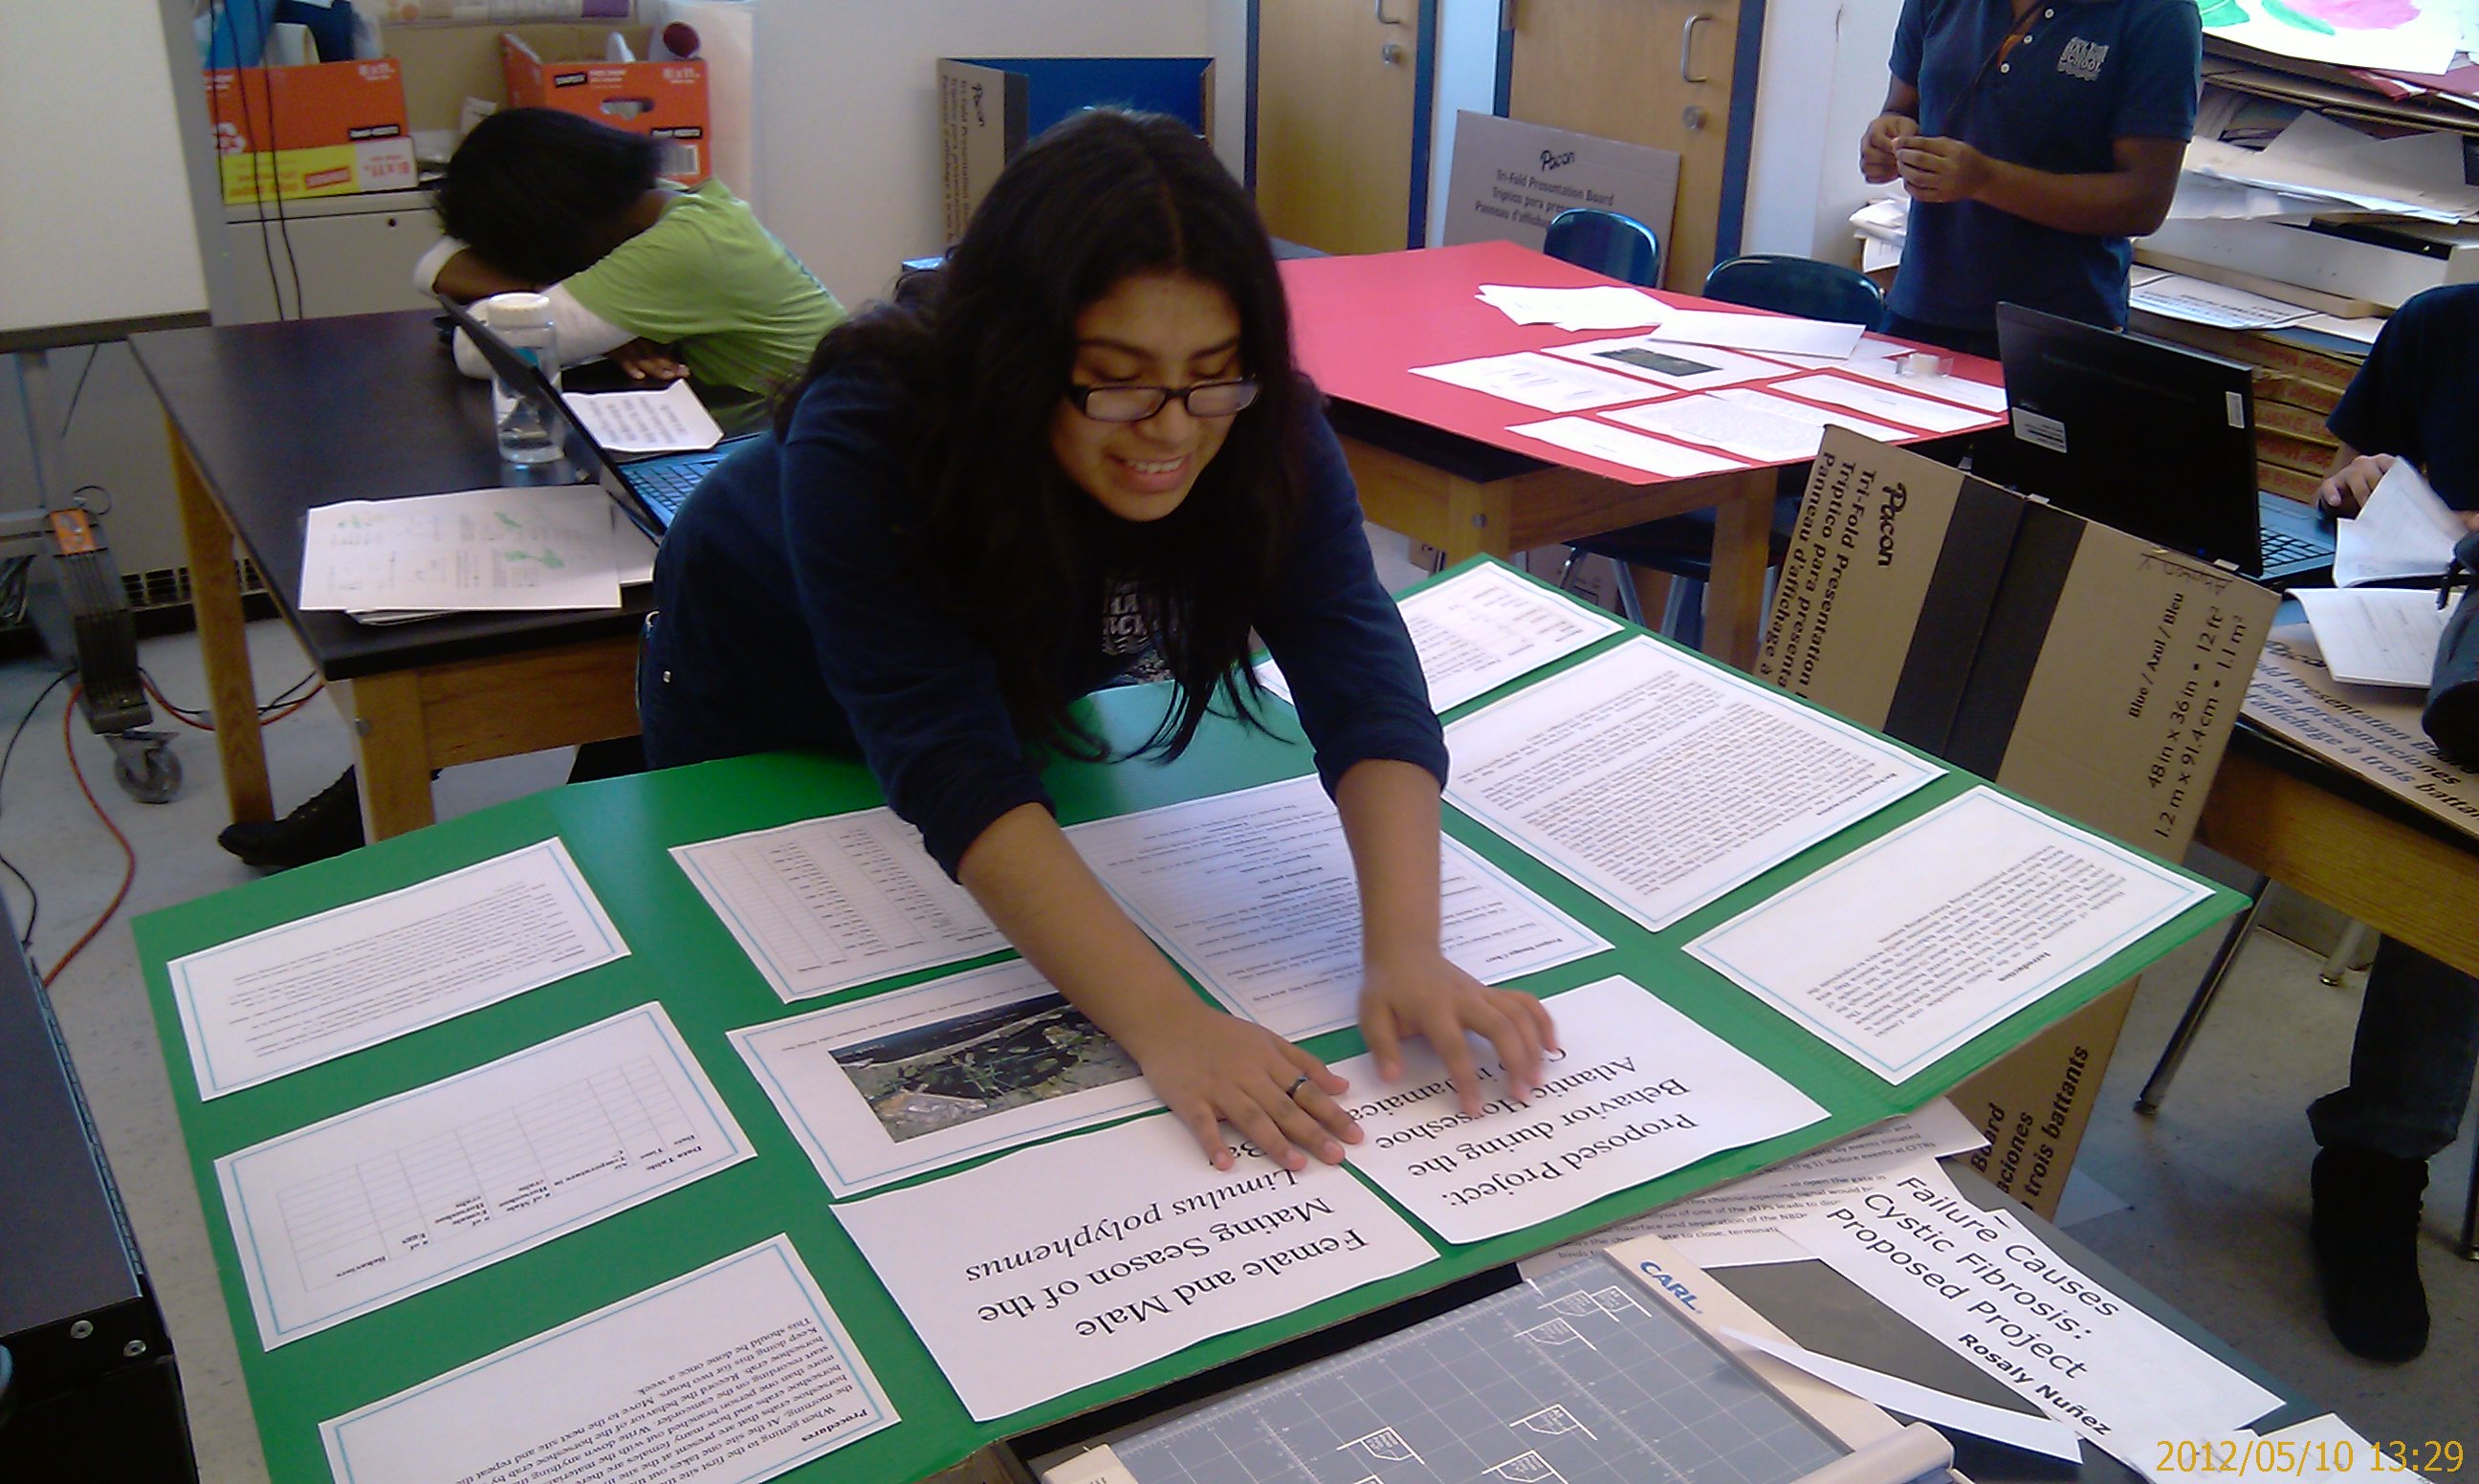 Kimberly MOrales working on her poster display.